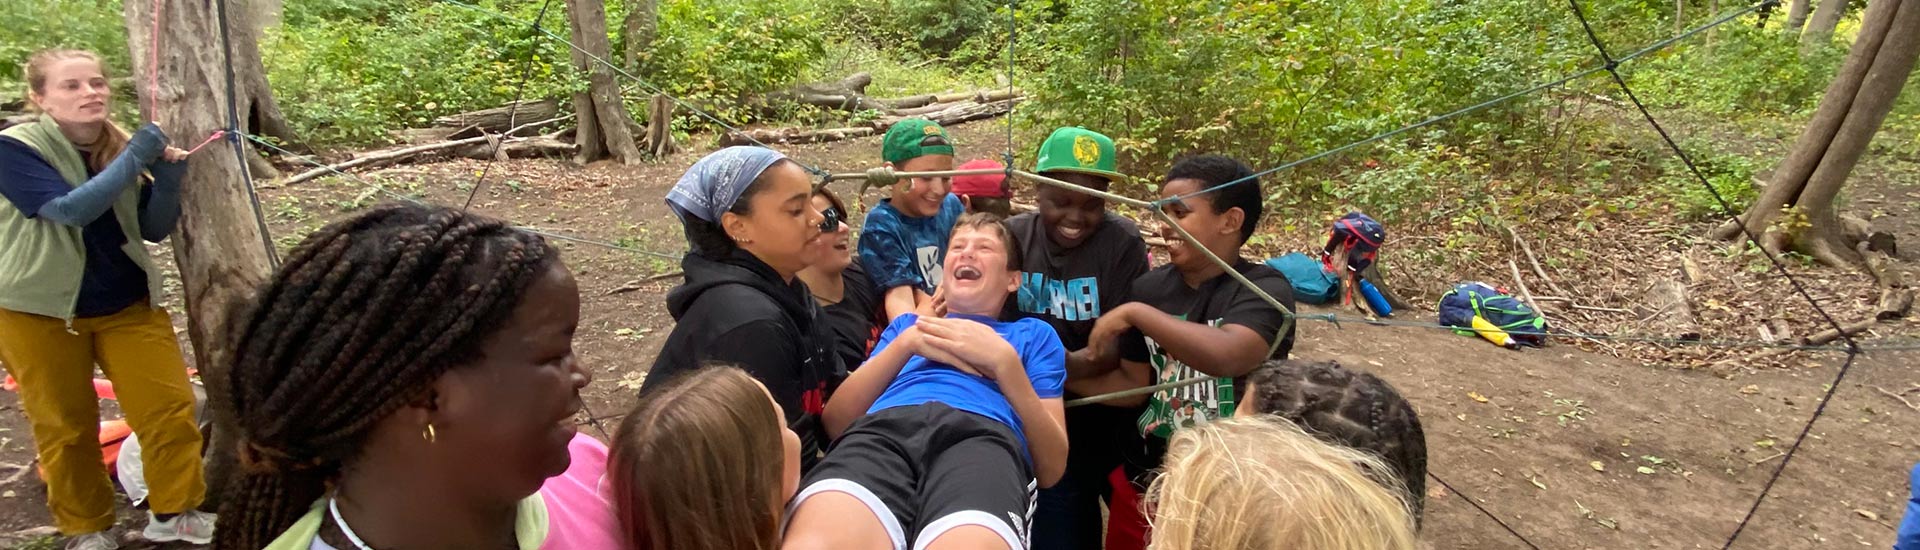 A group of sixth graders bond during an Outward Bound activity